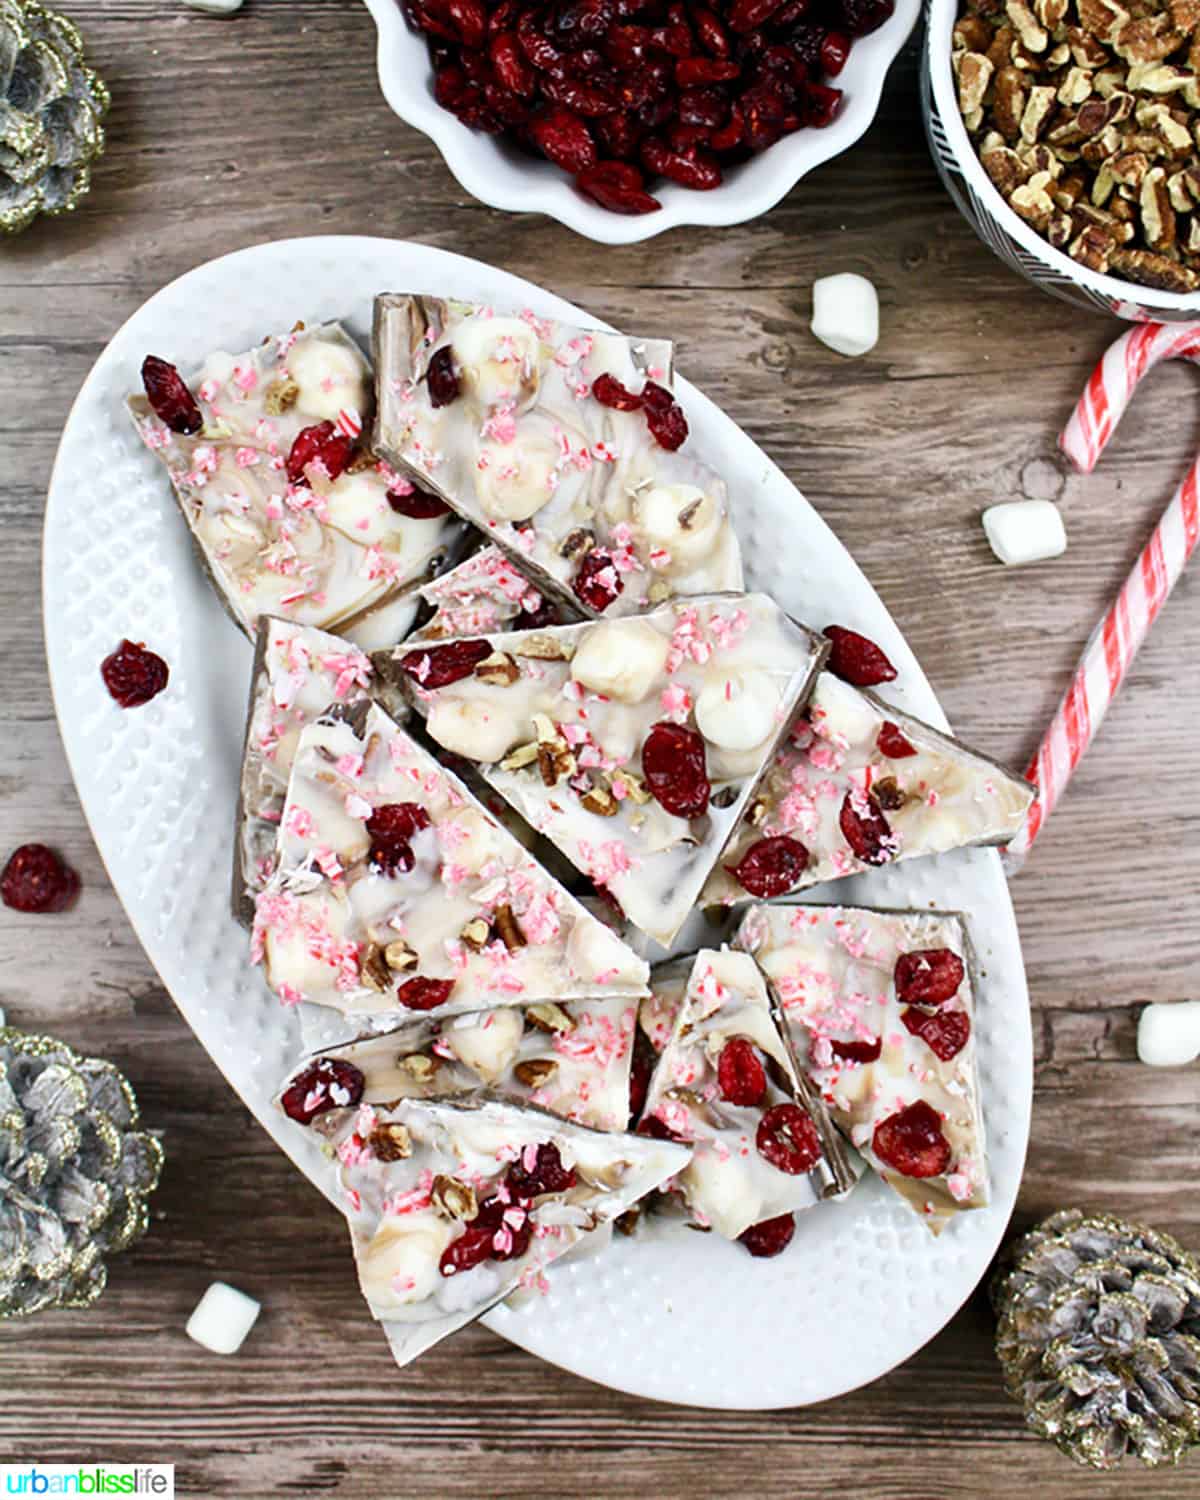 broken pieces of white chocolate cranberry bark with peppermint, cranberries, pecans, and marshmallows on a white plate with candy canes.